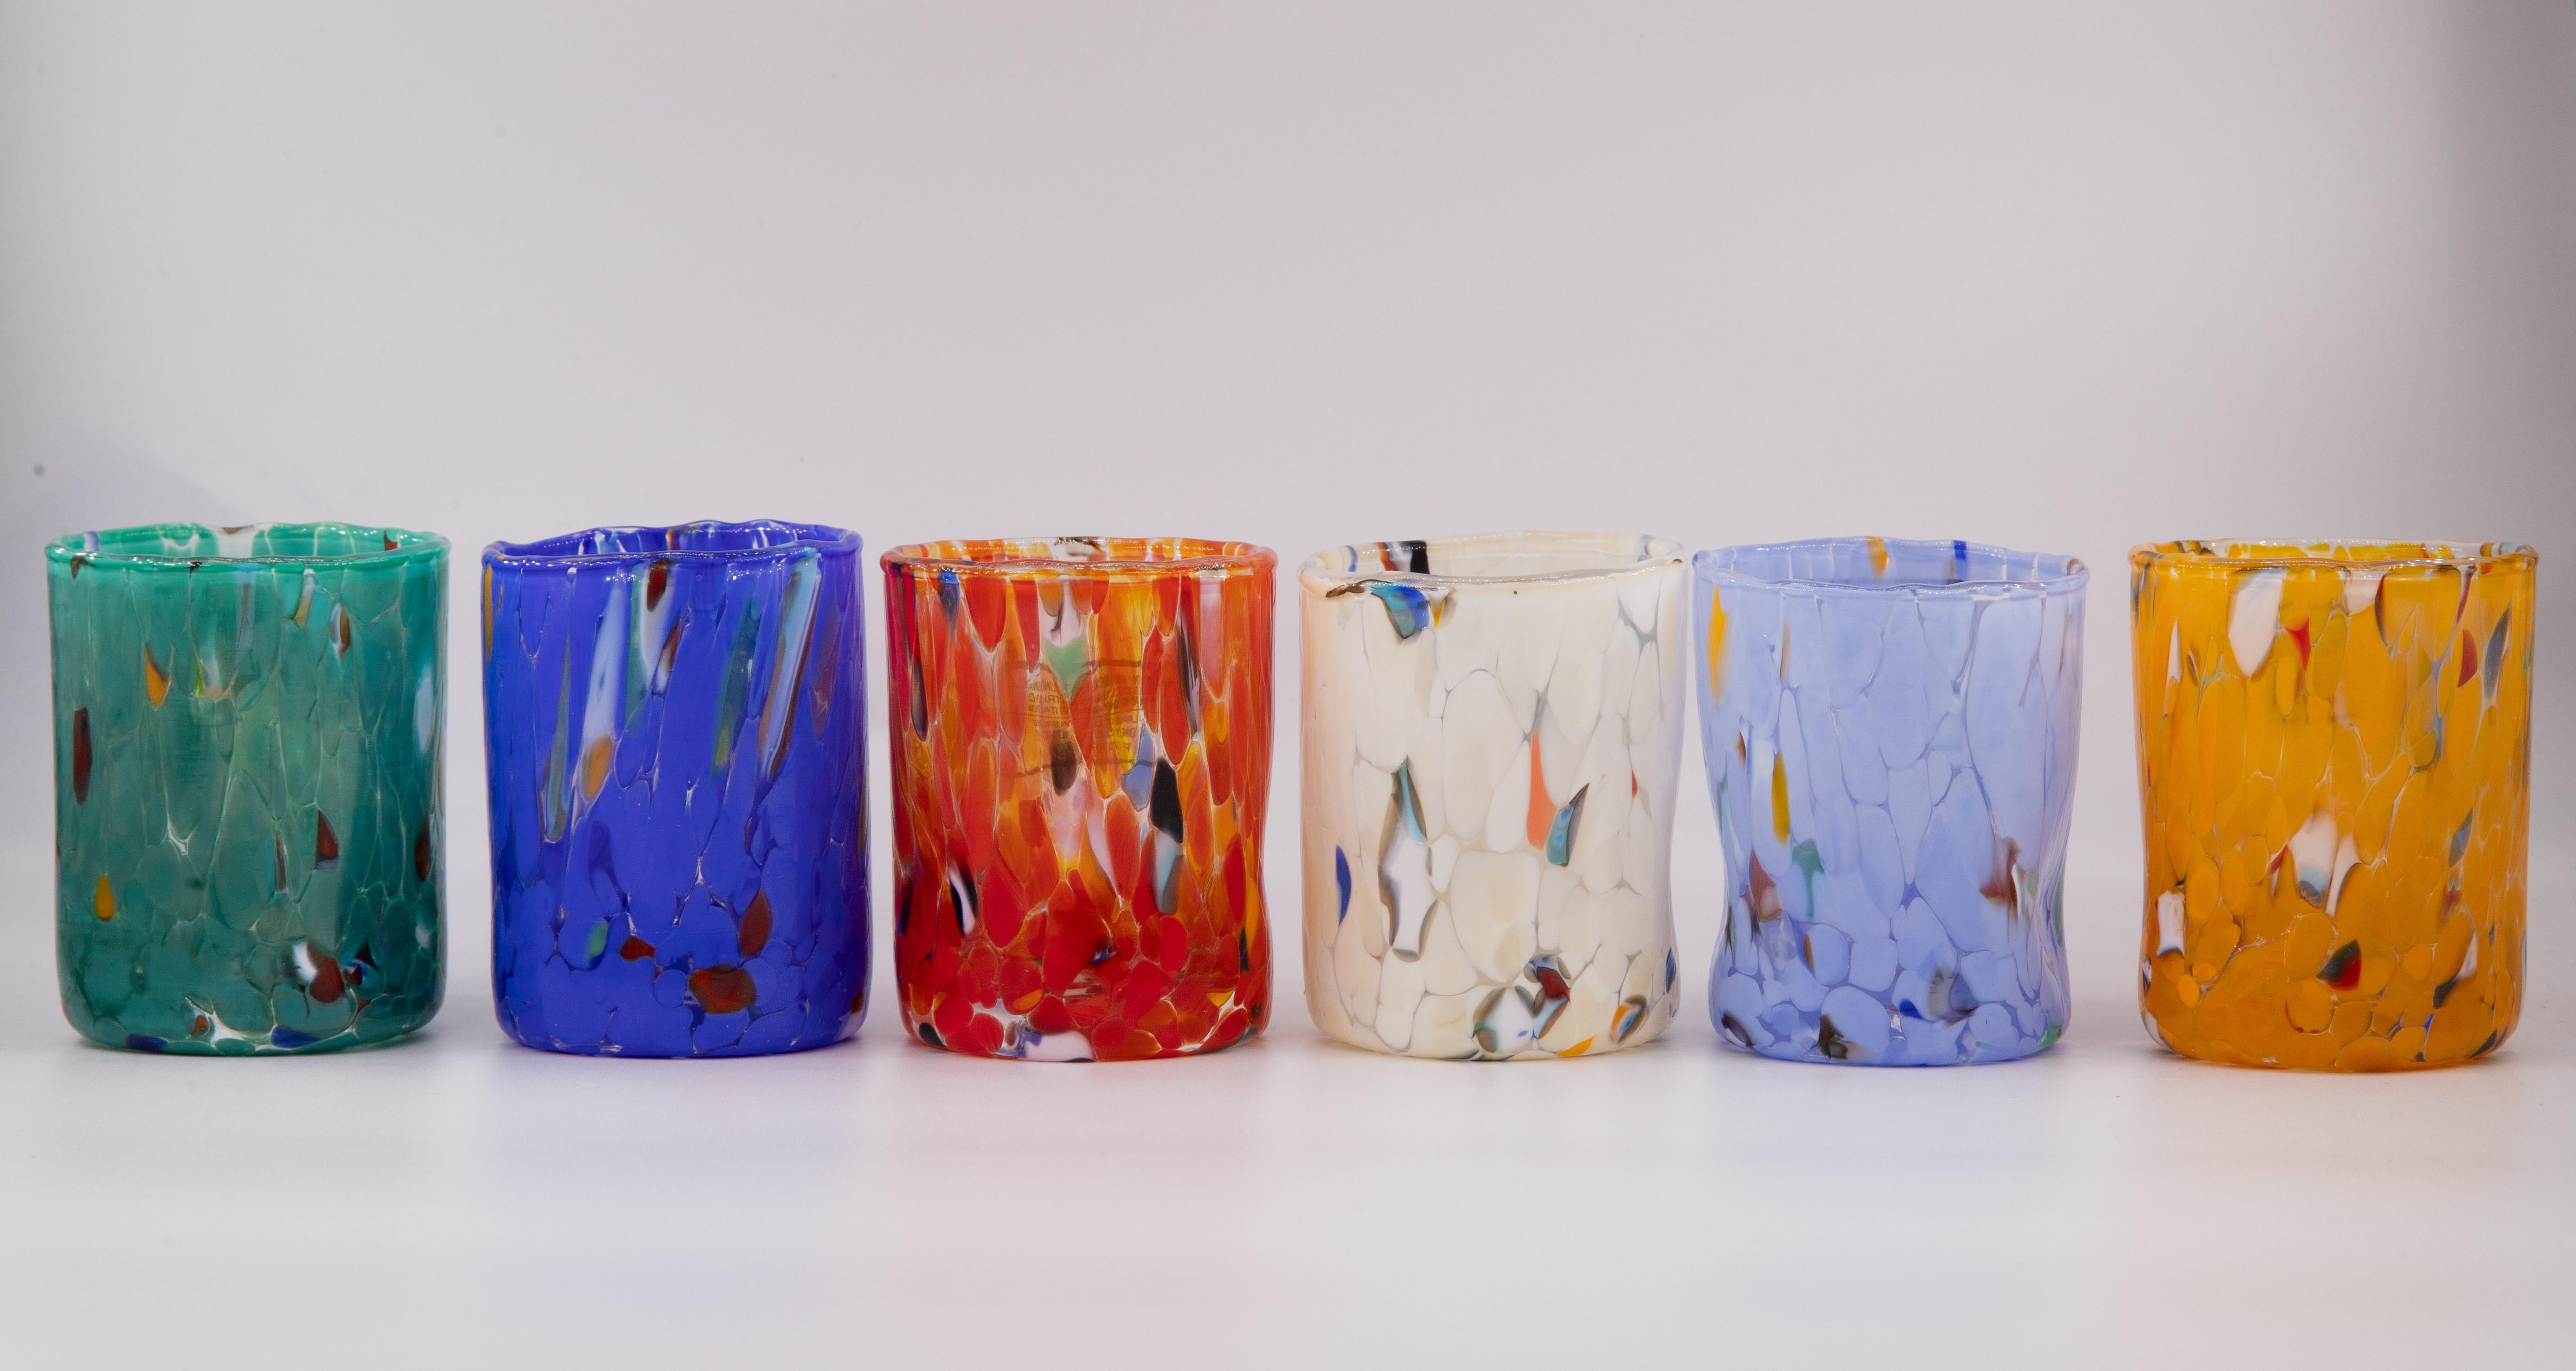 Set of six shot\café glasses color Multicolor (petrol green, blue, red, ivory, periwinkle, mustard) - Murano glass - Made in Italy.

These individual Murano glasses are inspired by the classic 